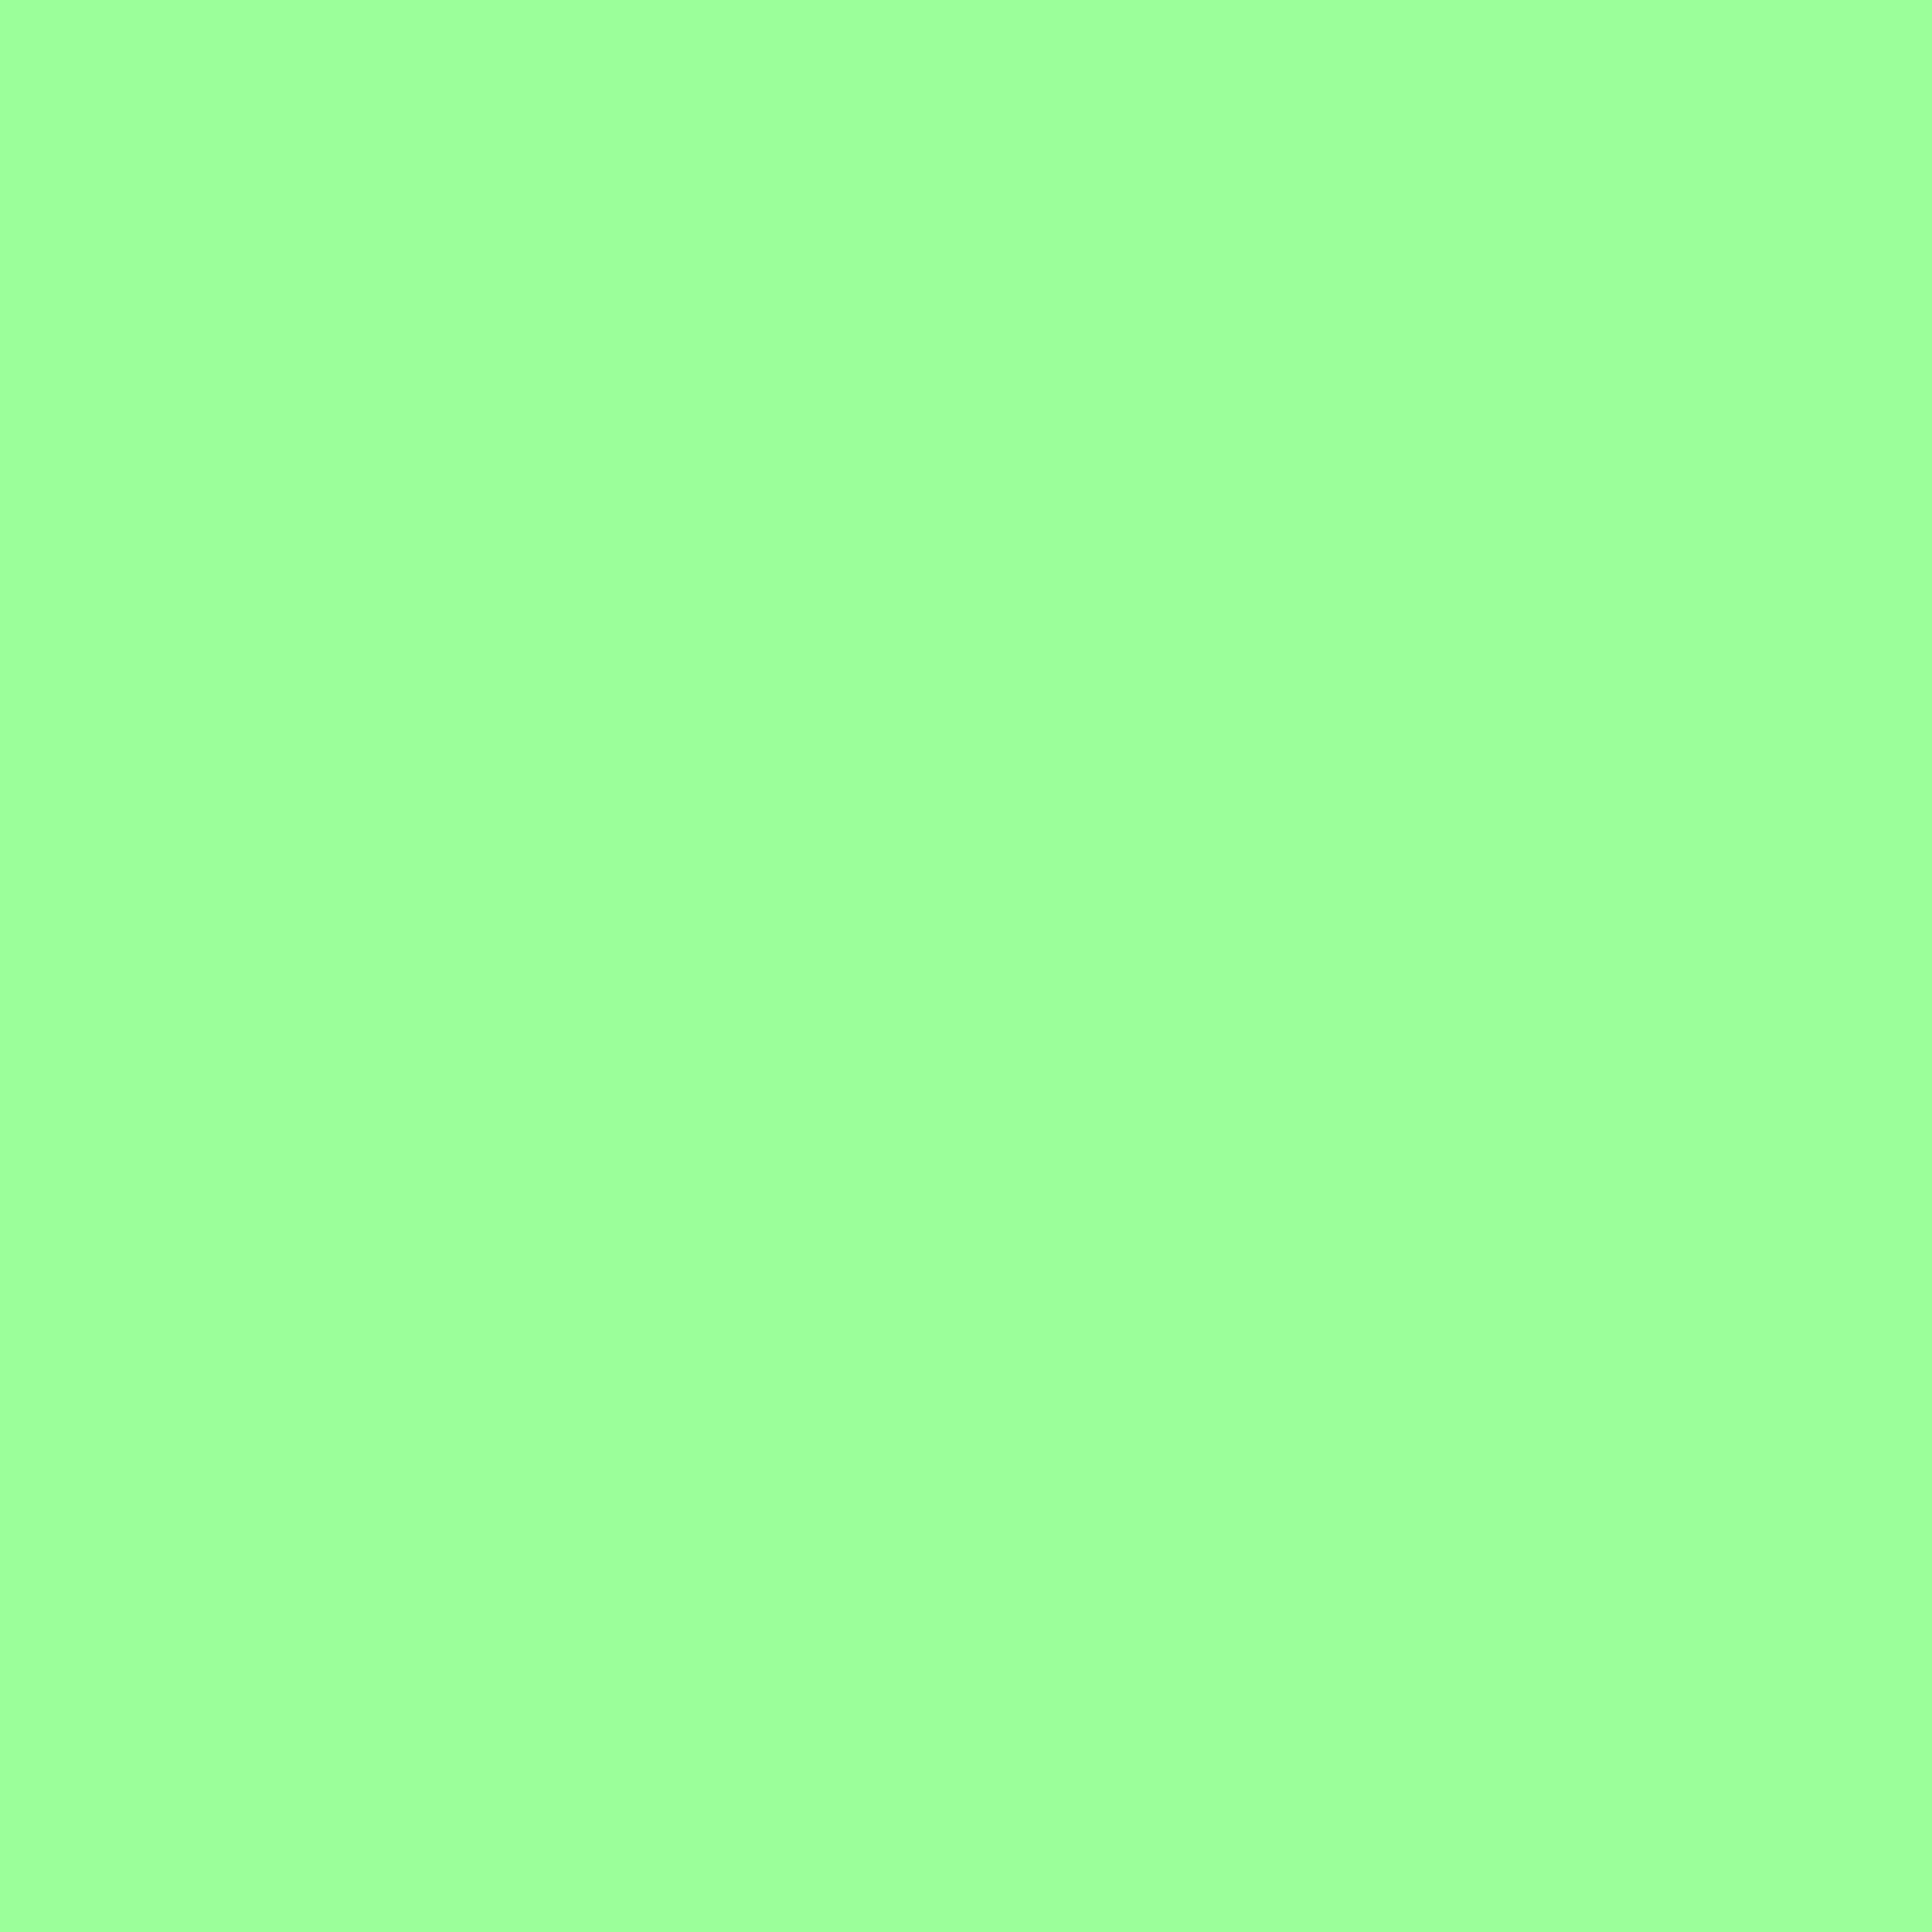 3600x3600 Mint Green Solid Color Background